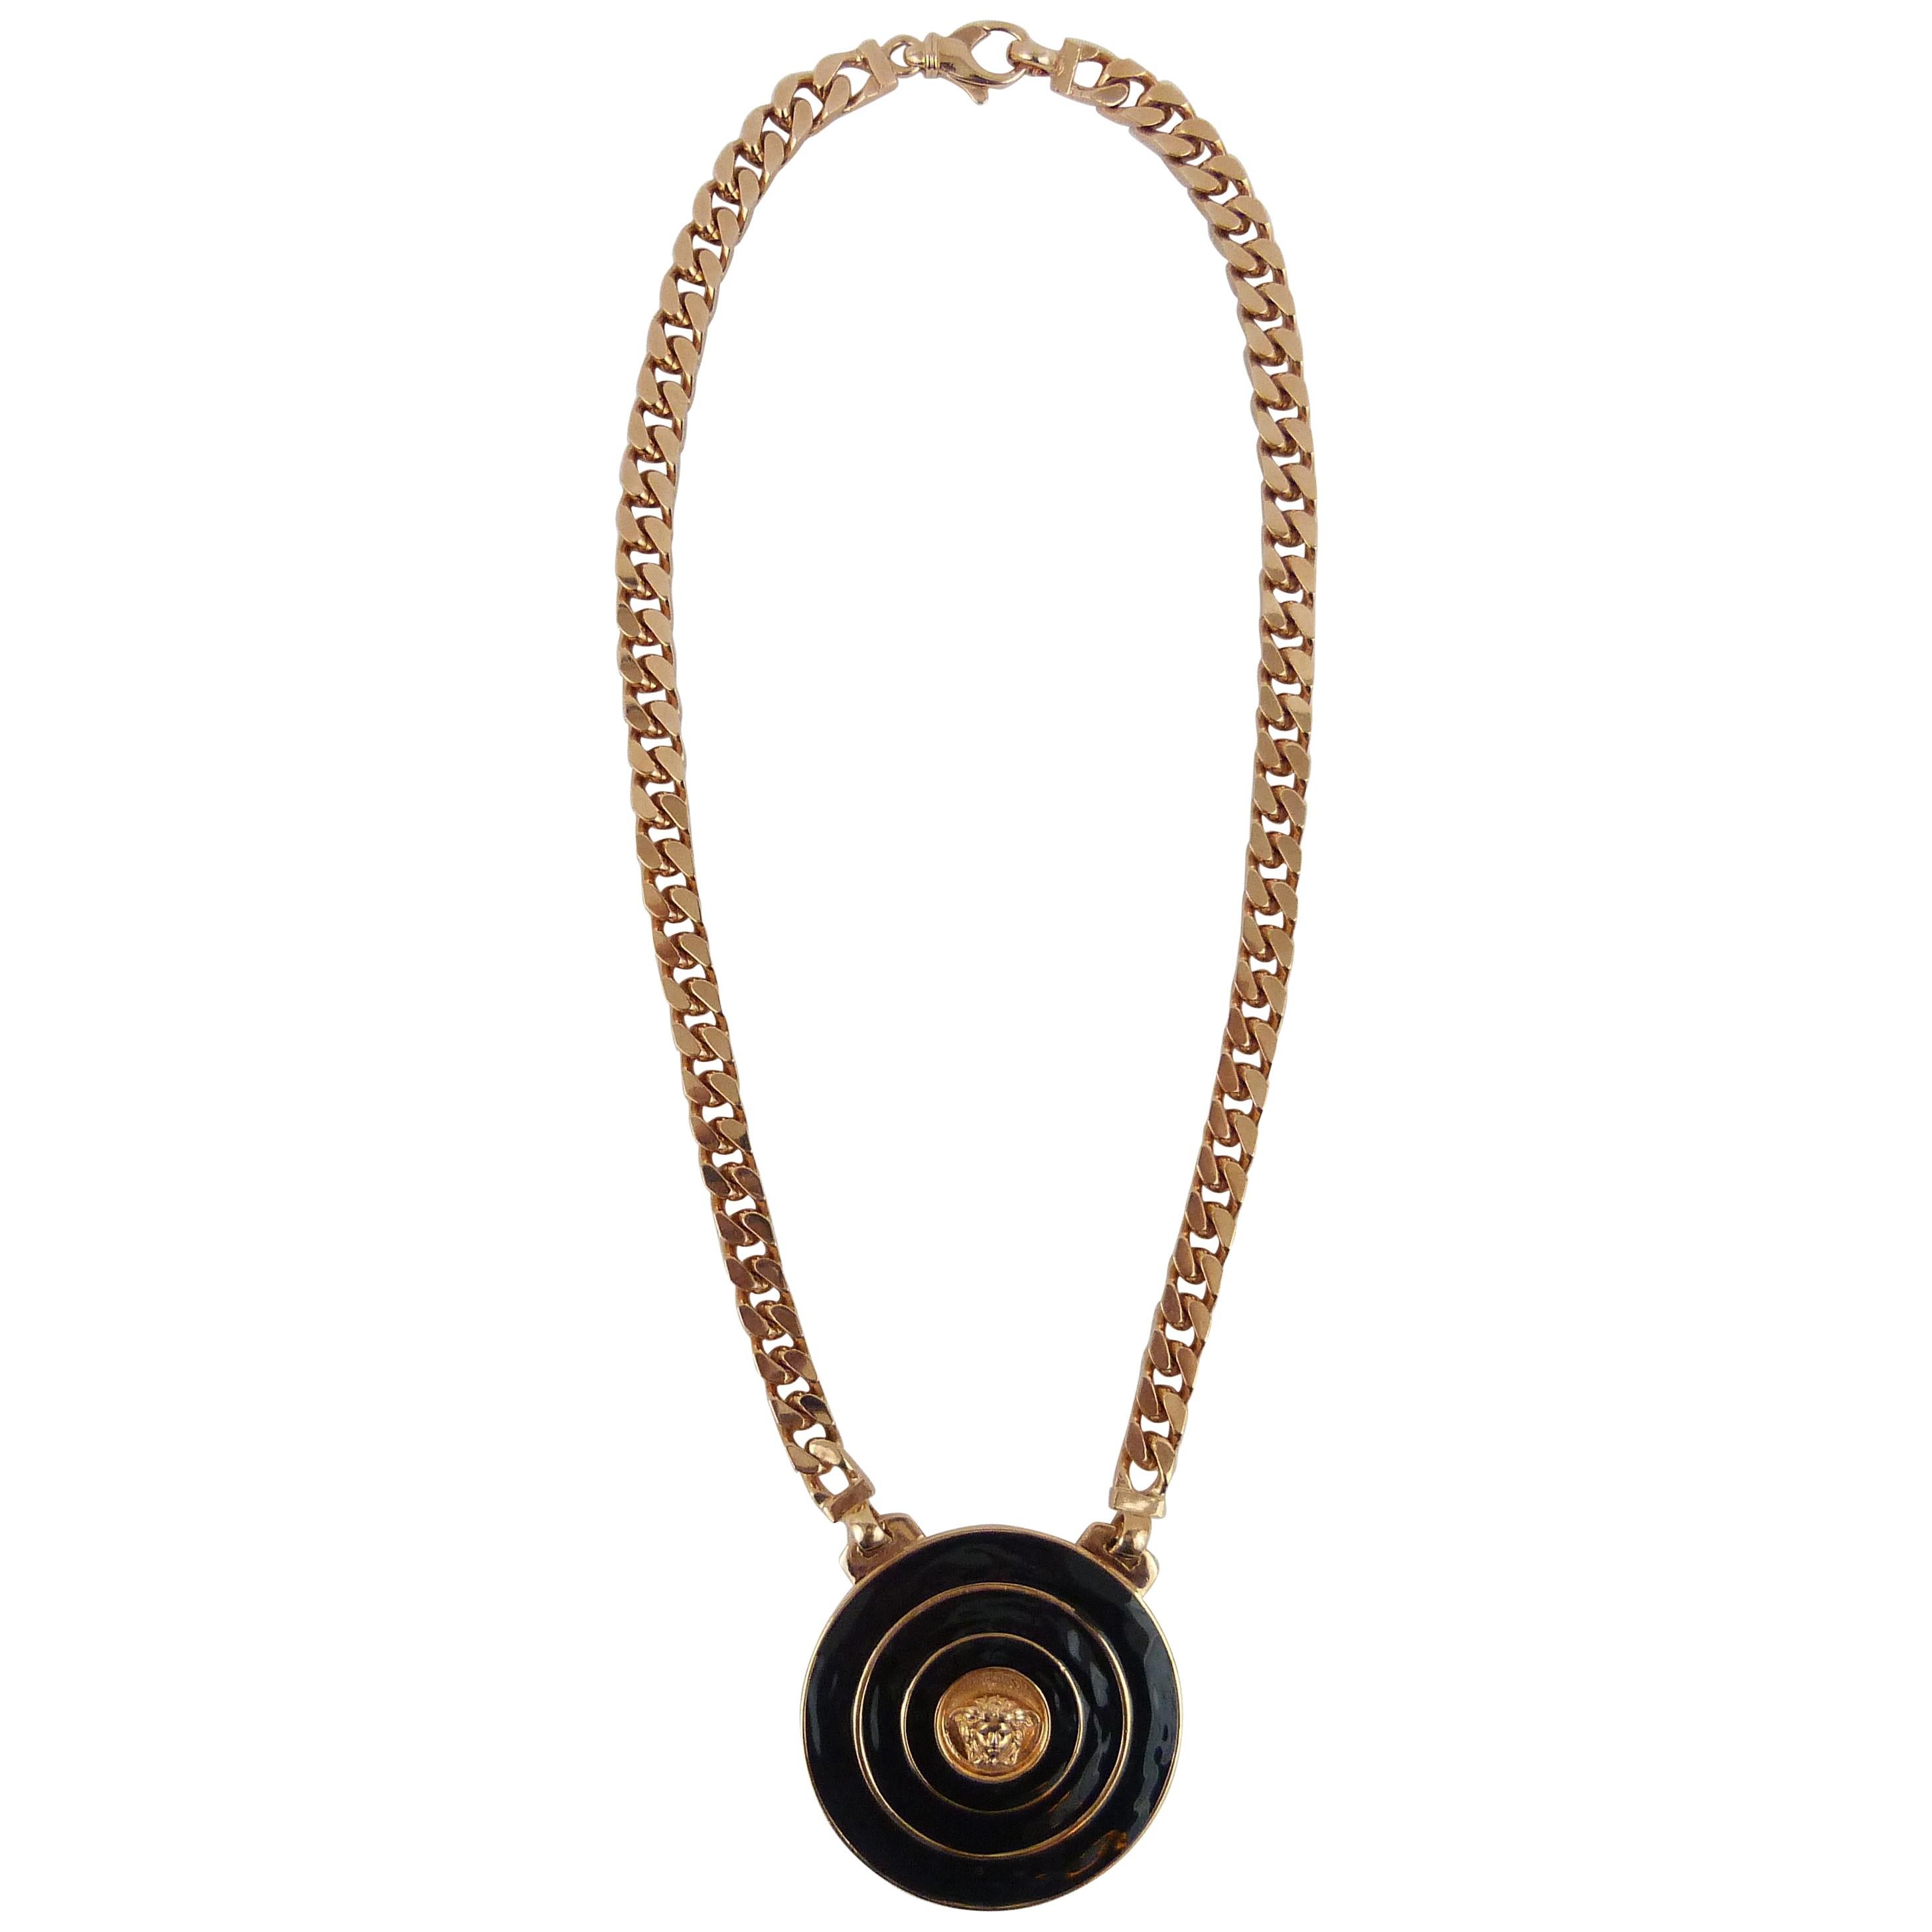 Gianni Versace rose gold and black enamel chain medallion necklace   For Sale